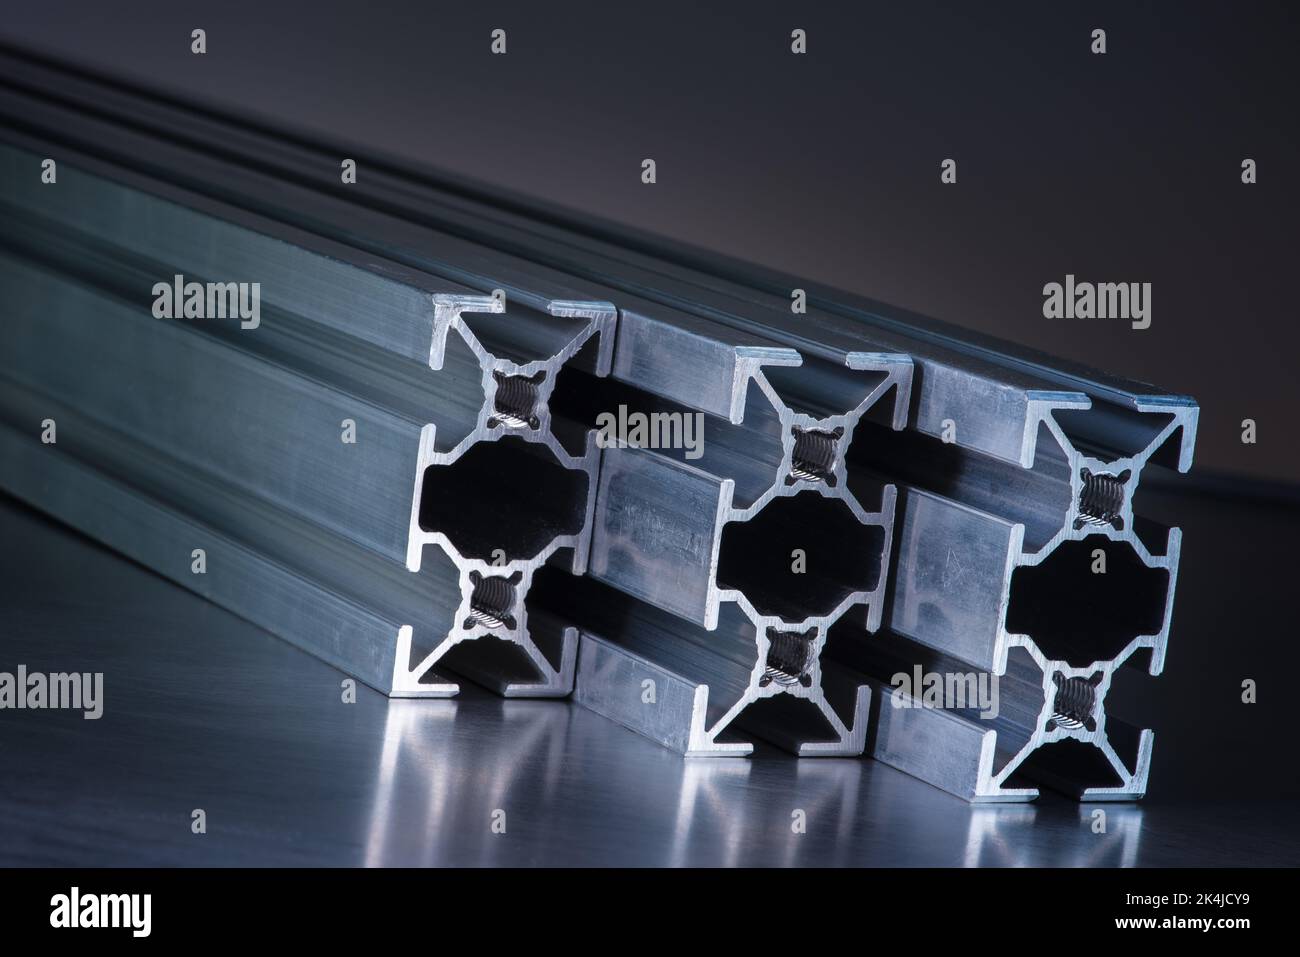 Aluminum exstrusion profile on gray background, component of metalurgy industry Stock Photo